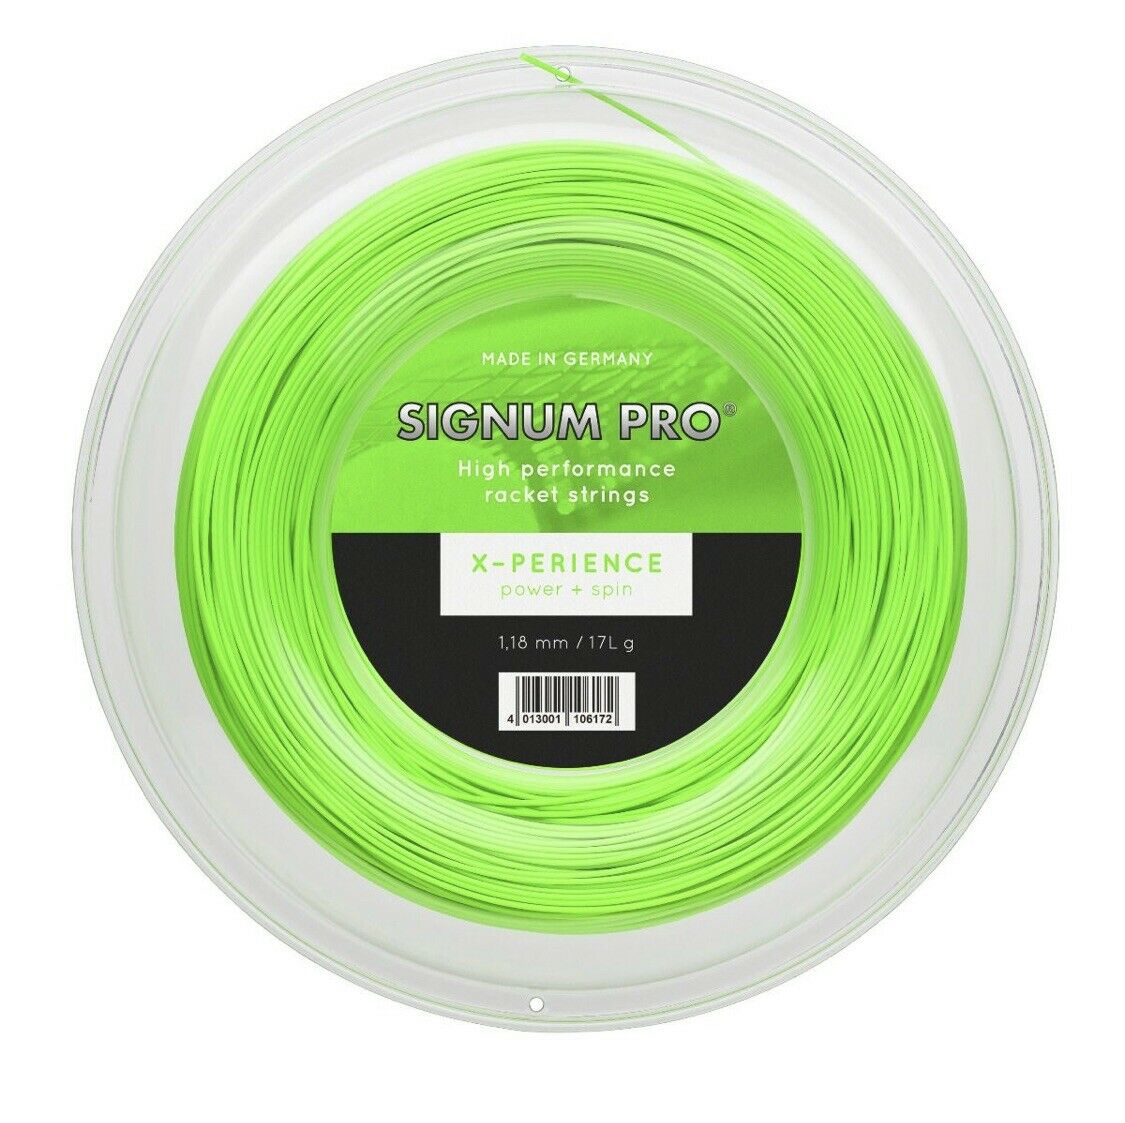 Signum Pro X-perience 18/1.18mm Tennis String 200m Reel Color: Green